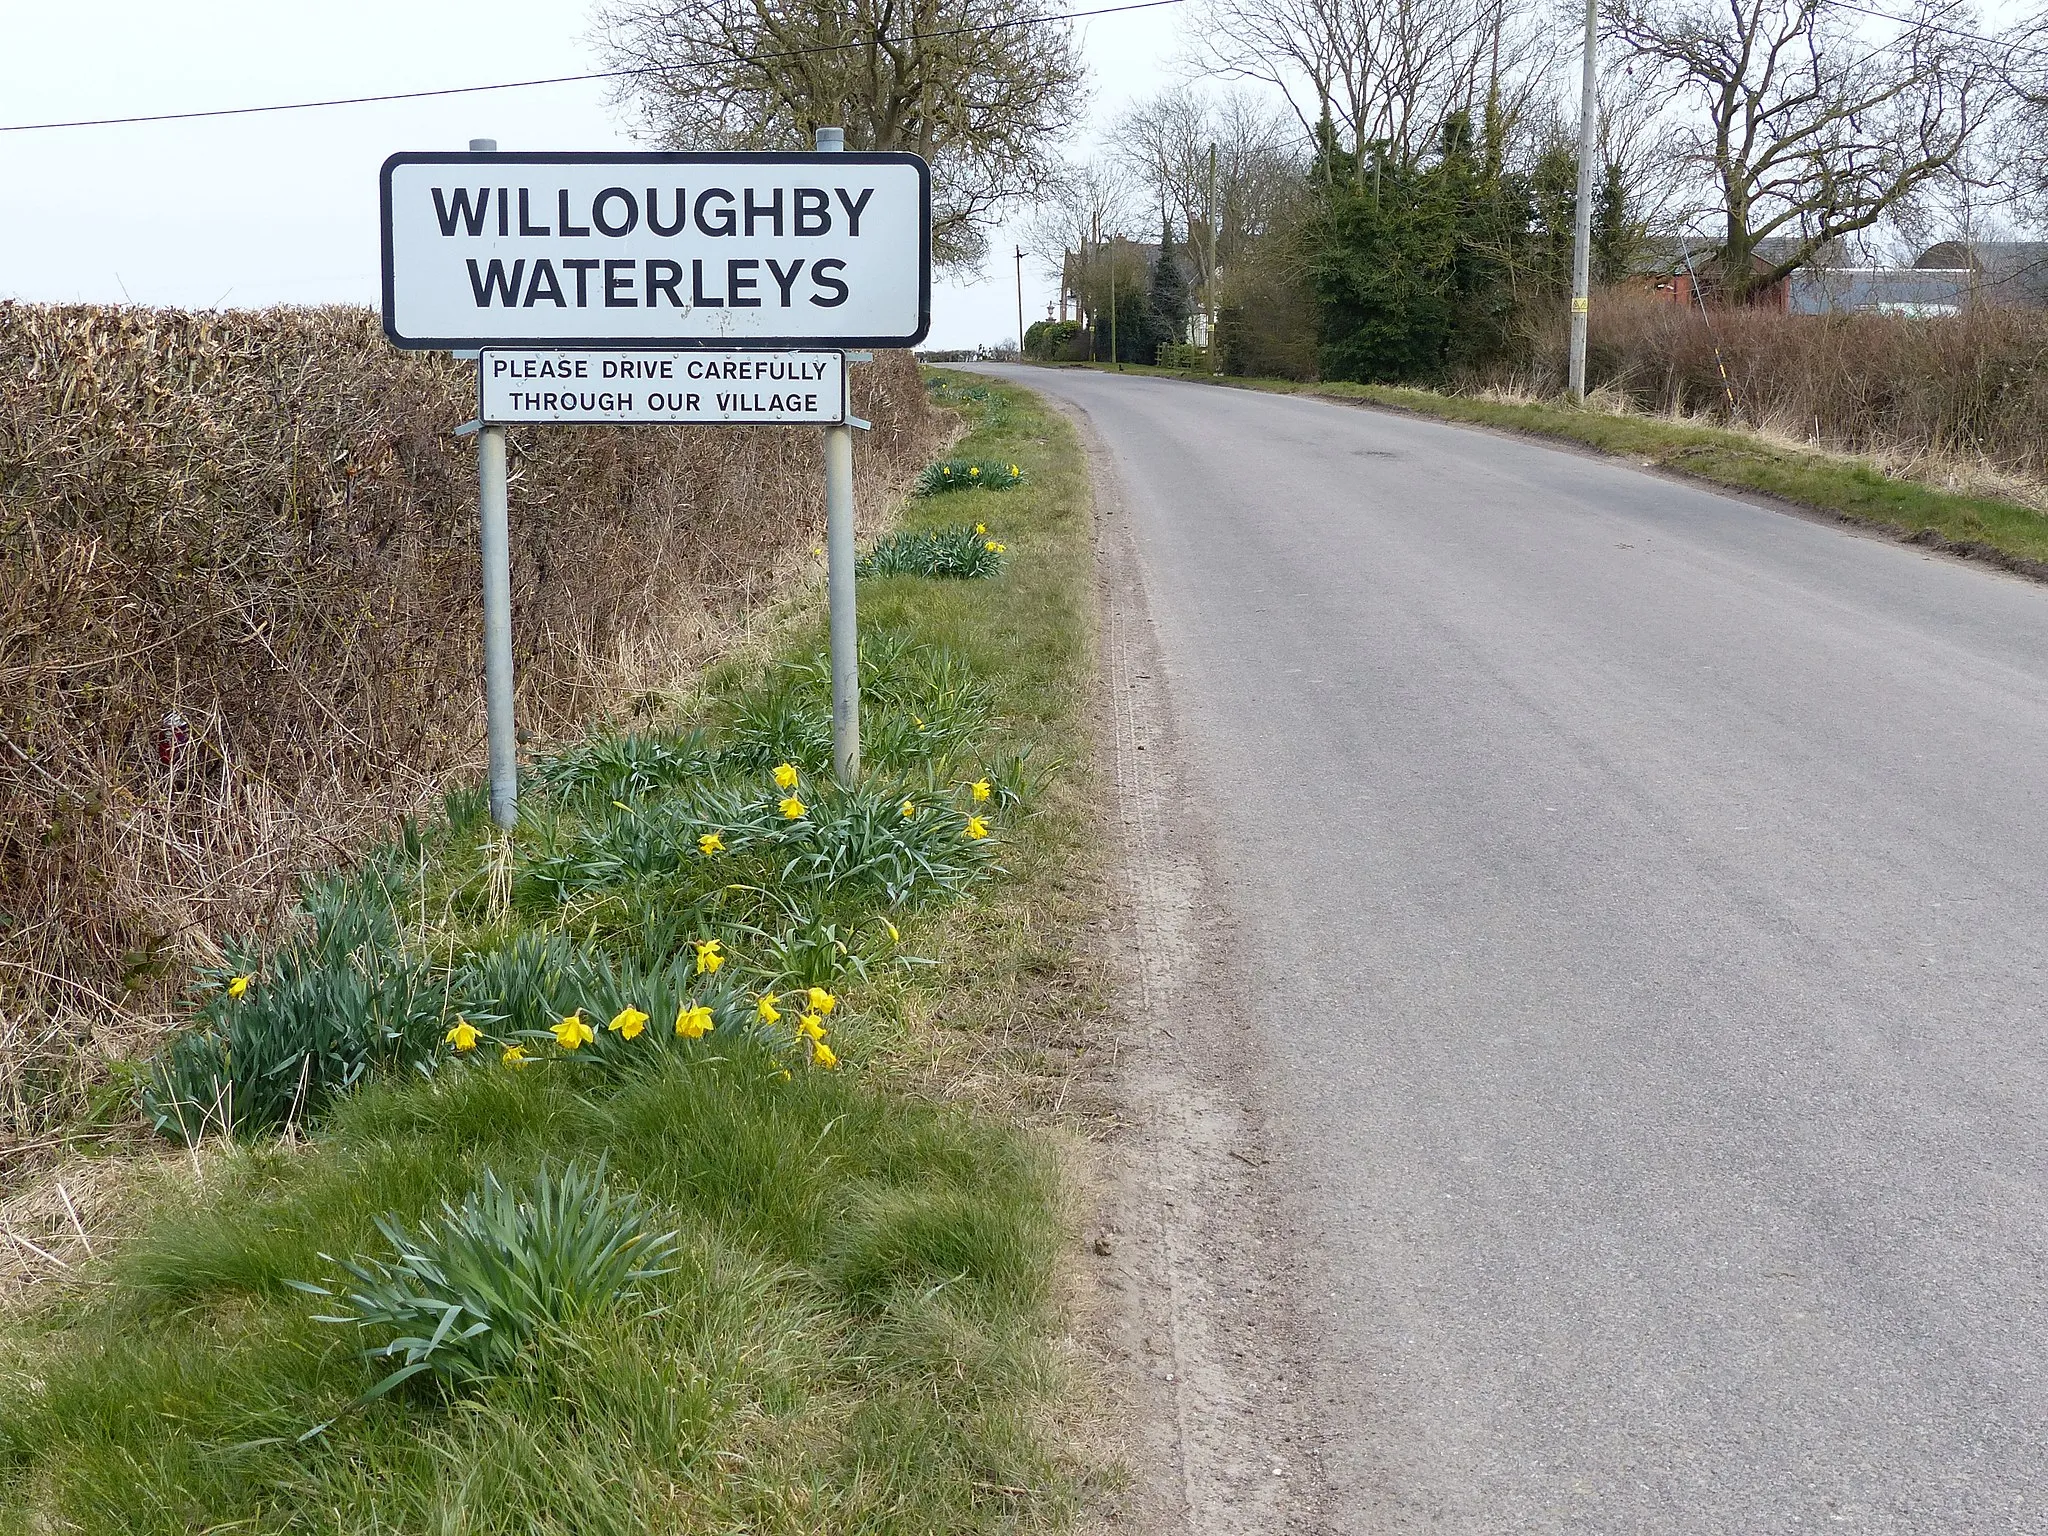 Photo showing: Welcome place name sign for Willoughby Waterleys